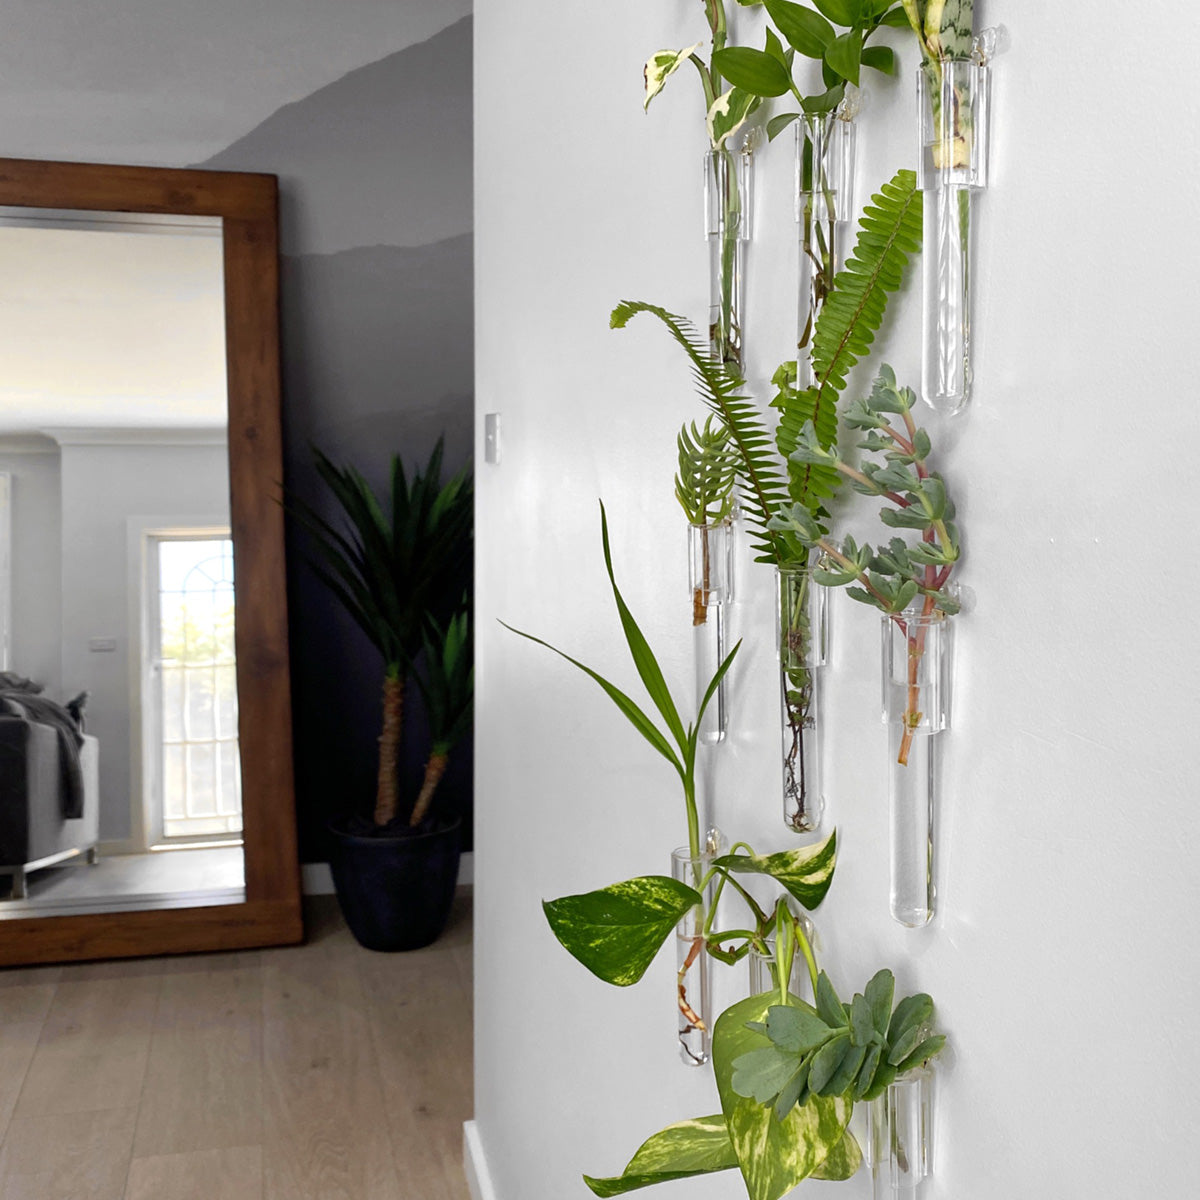 Glass Test Tube Hanging Planters - Set of 9 shown on the wall indoors.